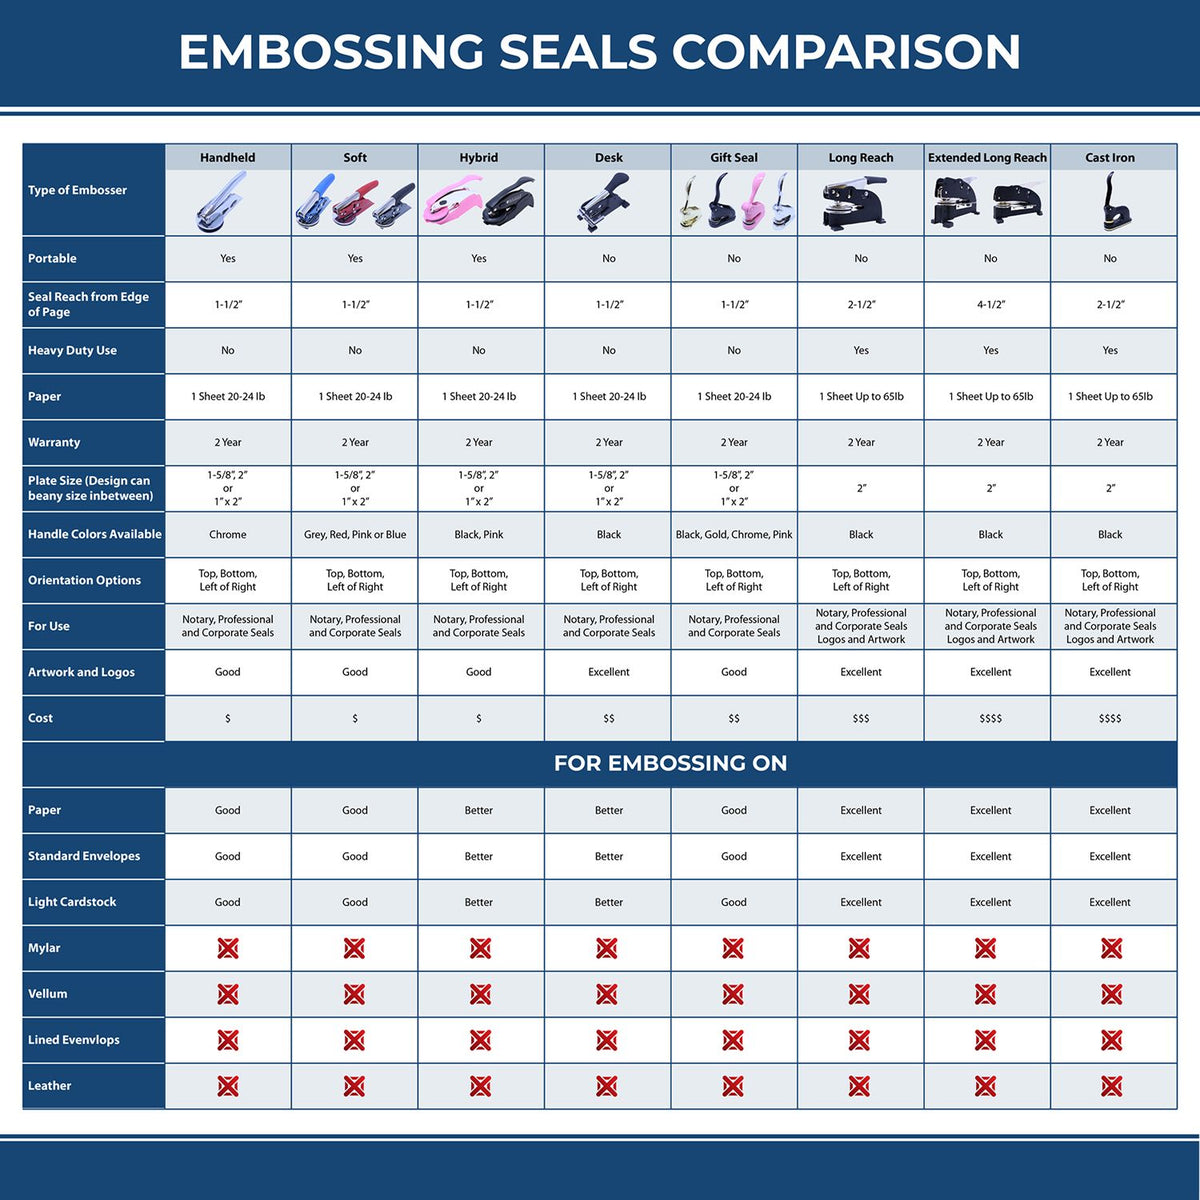 A comparison chart for the different types of mount models available for the Handheld District of Columbia Professional Engineer Embosser.